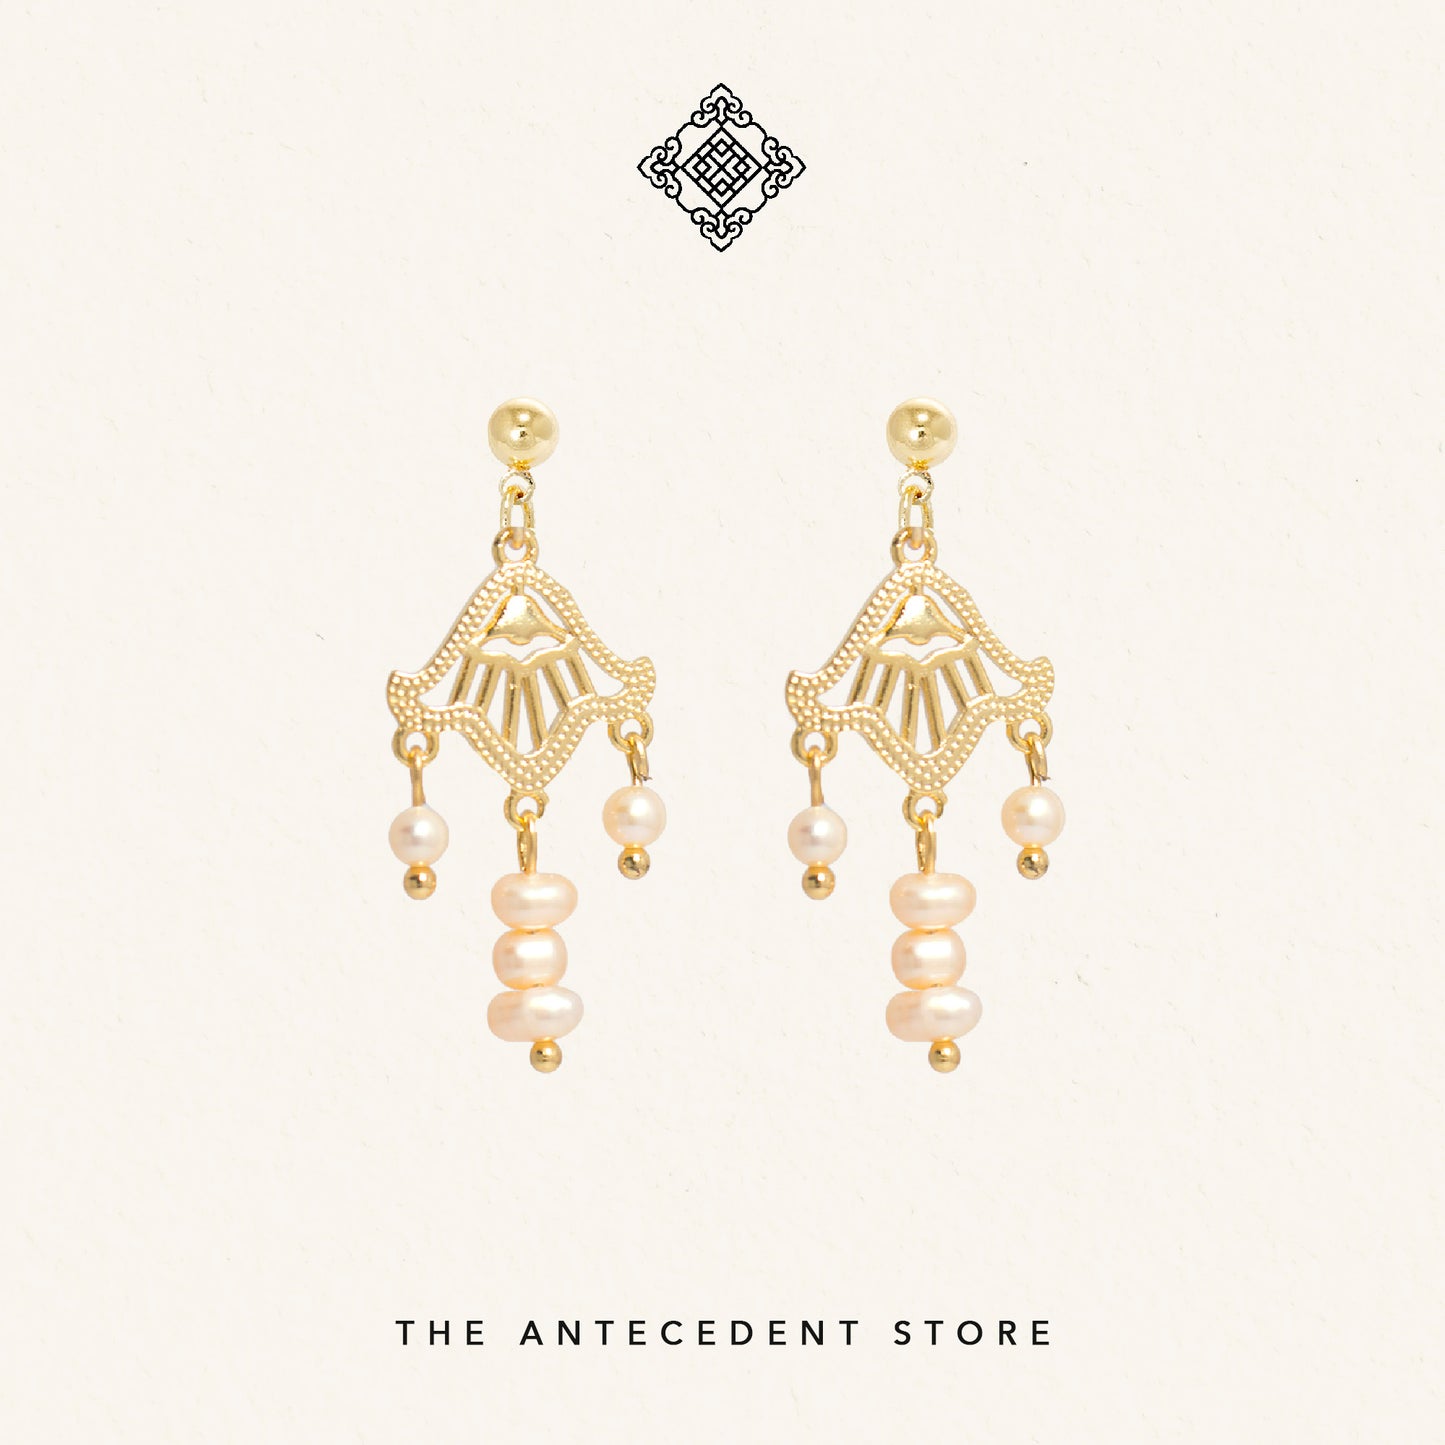 Oriental Motif Earrings With Freshwater Pearls - 14K Real Gold Plated Jewelry